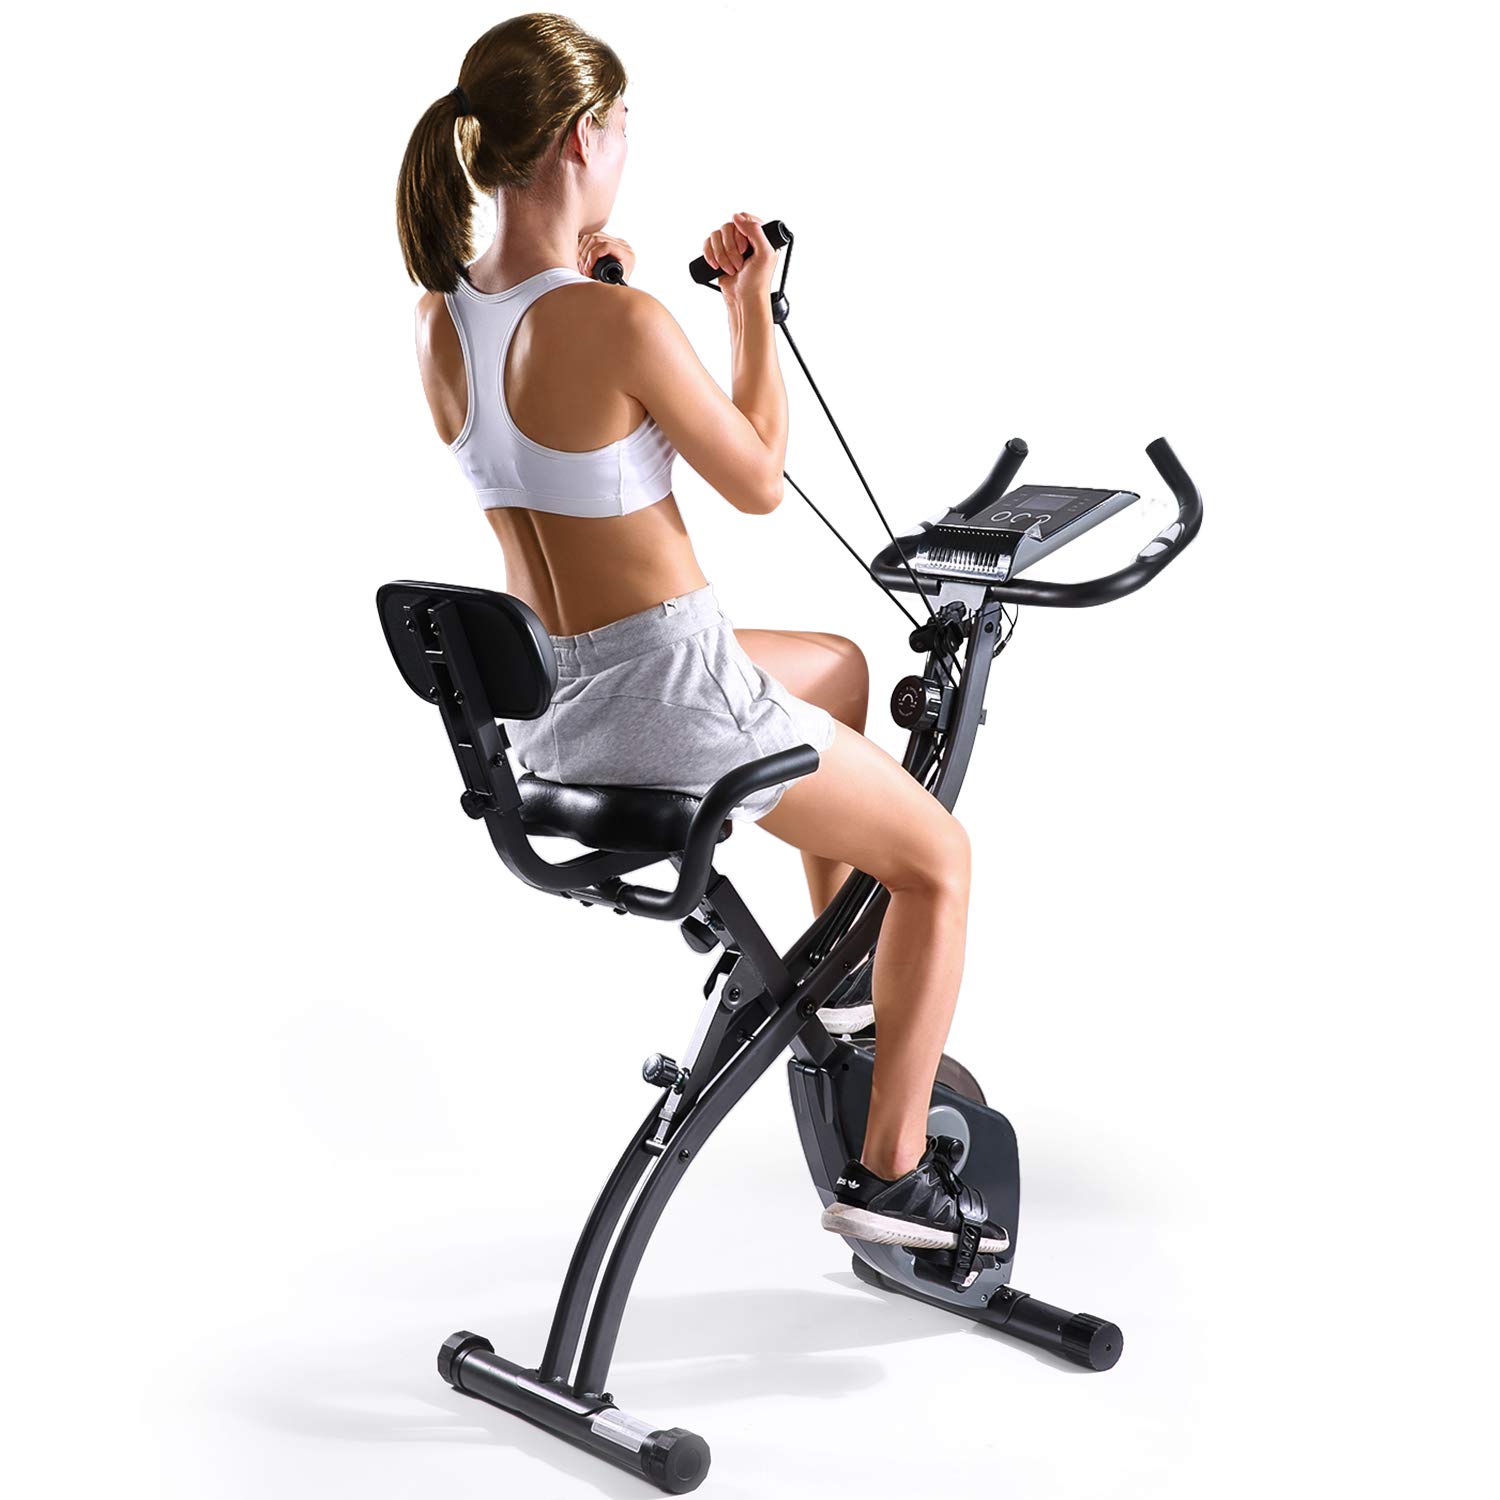 MaxKare 3-in-1 Exercise Bike Quiet Folding Magnetic Stationary Exercise Bikes with Arm Resistance Bands Home Workout Use - image 1 of 12